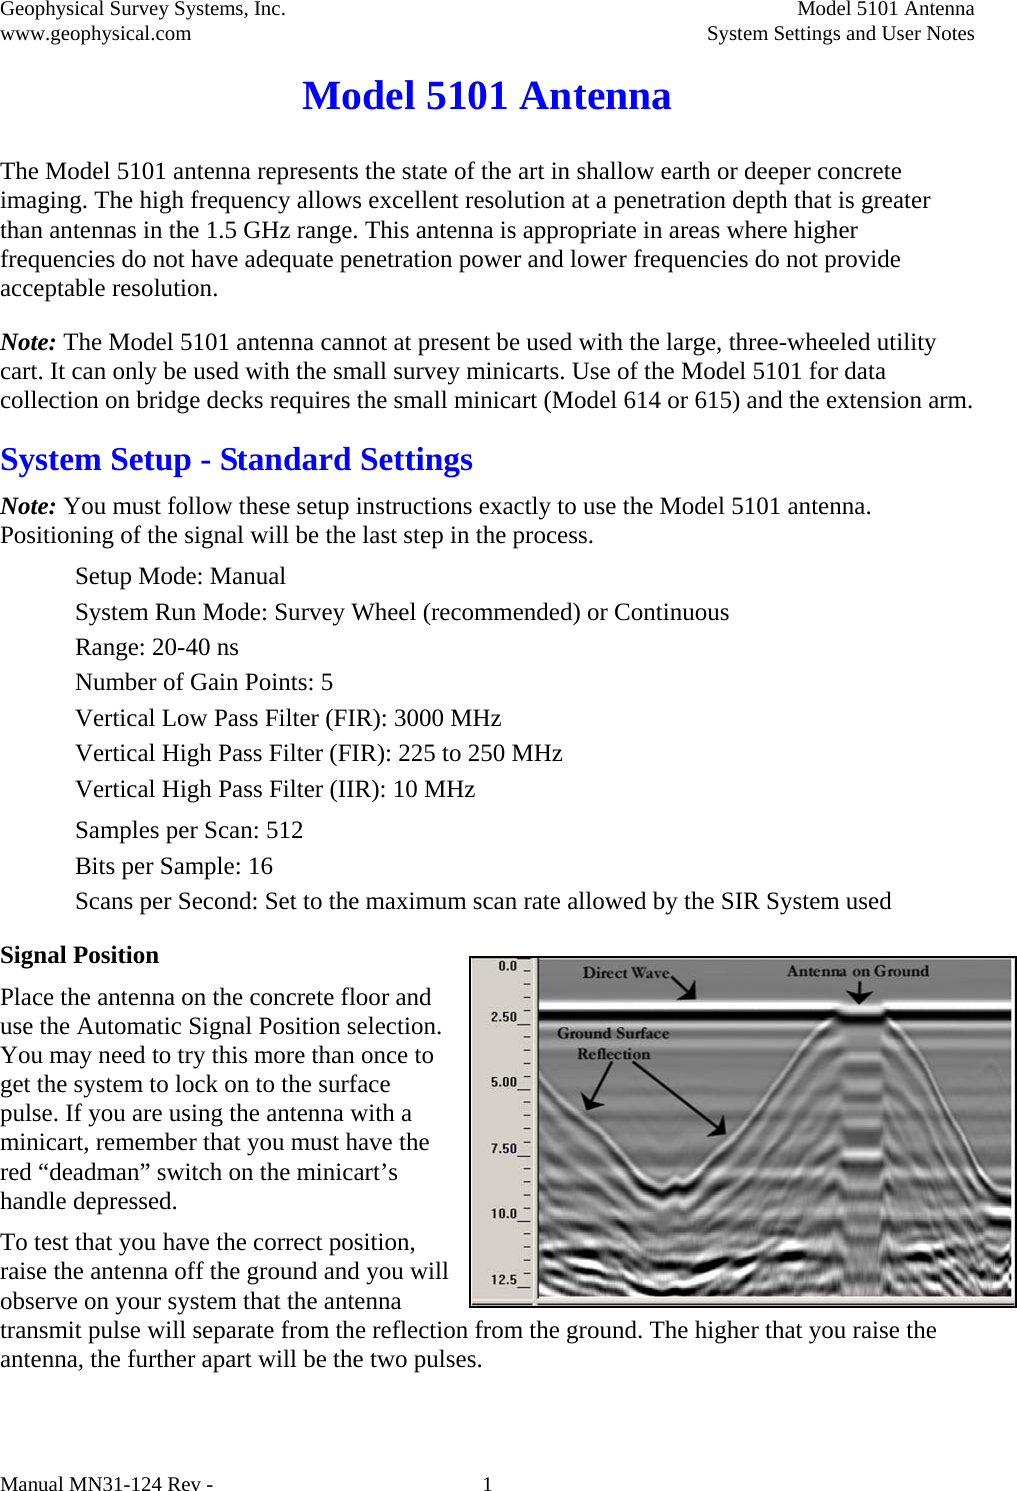 Geophysical Survey Systems, Inc.  Model 5101 Antenna www.geophysical.com System Settings and User Notes  Manual MN31-124 Rev -  1 Model 5101 Antenna The Model 5101 antenna represents the state of the art in shallow earth or deeper concrete imaging. The high frequency allows excellent resolution at a penetration depth that is greater than antennas in the 1.5 GHz range. This antenna is appropriate in areas where higher frequencies do not have adequate penetration power and lower frequencies do not provide acceptable resolution. Note: The Model 5101 antenna cannot at present be used with the large, three-wheeled utility cart. It can only be used with the small survey minicarts. Use of the Model 5101 for data collection on bridge decks requires the small minicart (Model 614 or 615) and the extension arm. System Setup - Standard Settings Note: You must follow these setup instructions exactly to use the Model 5101 antenna. Positioning of the signal will be the last step in the process. Setup Mode: Manual System Run Mode: Survey Wheel (recommended) or Continuous Range: 20-40 ns Number of Gain Points: 5 Vertical Low Pass Filter (FIR): 3000 MHz Vertical High Pass Filter (FIR): 225 to 250 MHz   Vertical High Pass Filter (IIR): 10 MHz Samples per Scan: 512 Bits per Sample: 16 Scans per Second: Set to the maximum scan rate allowed by the SIR System used Signal Position Place the antenna on the concrete floor and use the Automatic Signal Position selection. You may need to try this more than once to get the system to lock on to the surface pulse. If you are using the antenna with a minicart, remember that you must have the red “deadman” switch on the minicart’s handle depressed. To test that you have the correct position, raise the antenna off the ground and you will observe on your system that the antenna transmit pulse will separate from the reflection from the ground. The higher that you raise the antenna, the further apart will be the two pulses. 